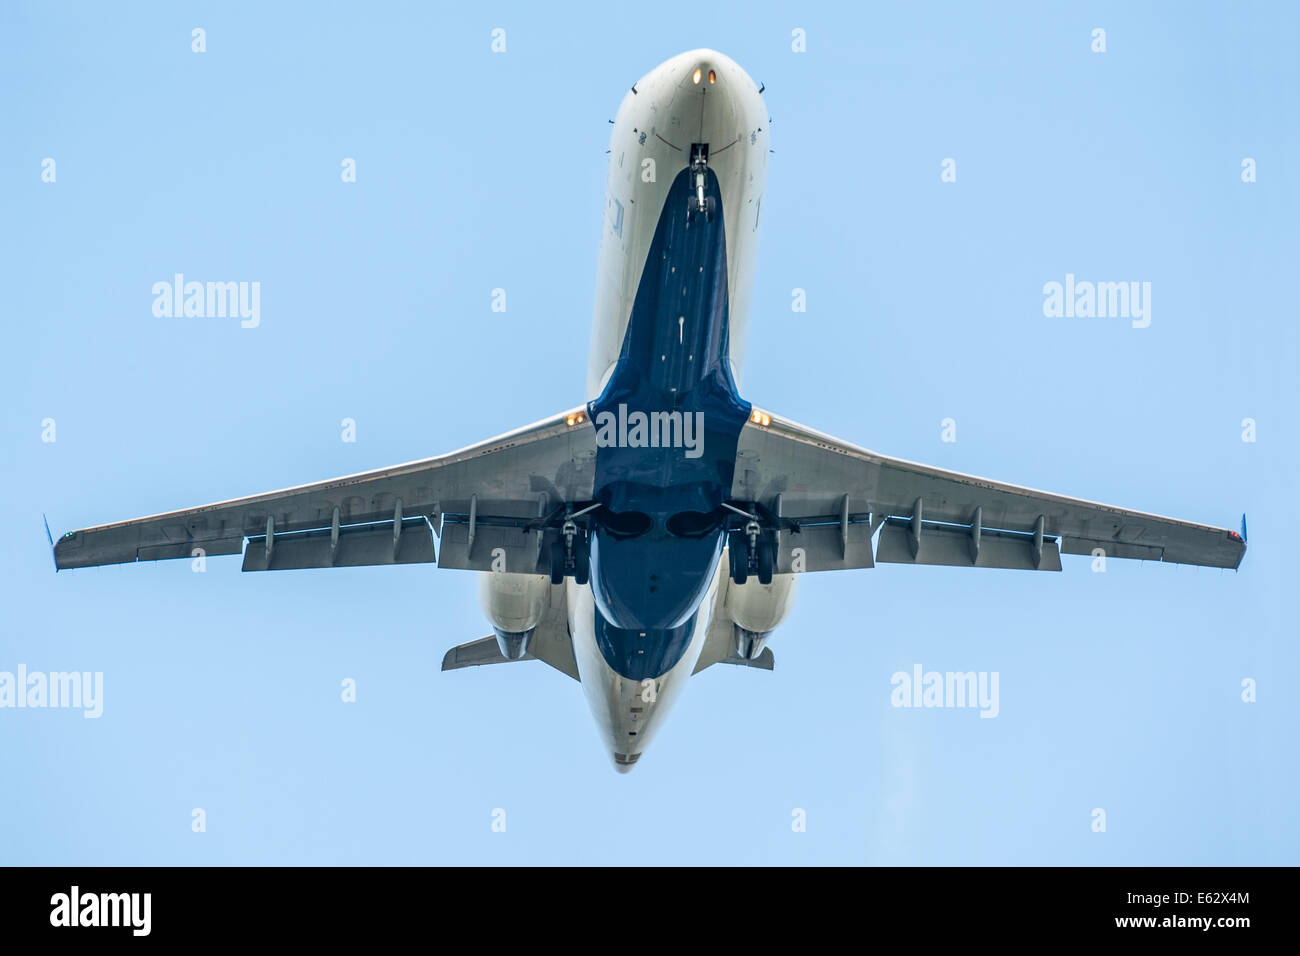 Underneath view of Delta Airlines passenger jet approaching approaching Hartsfield-Jackson Atlanta International Airport. USA. Stock Photo